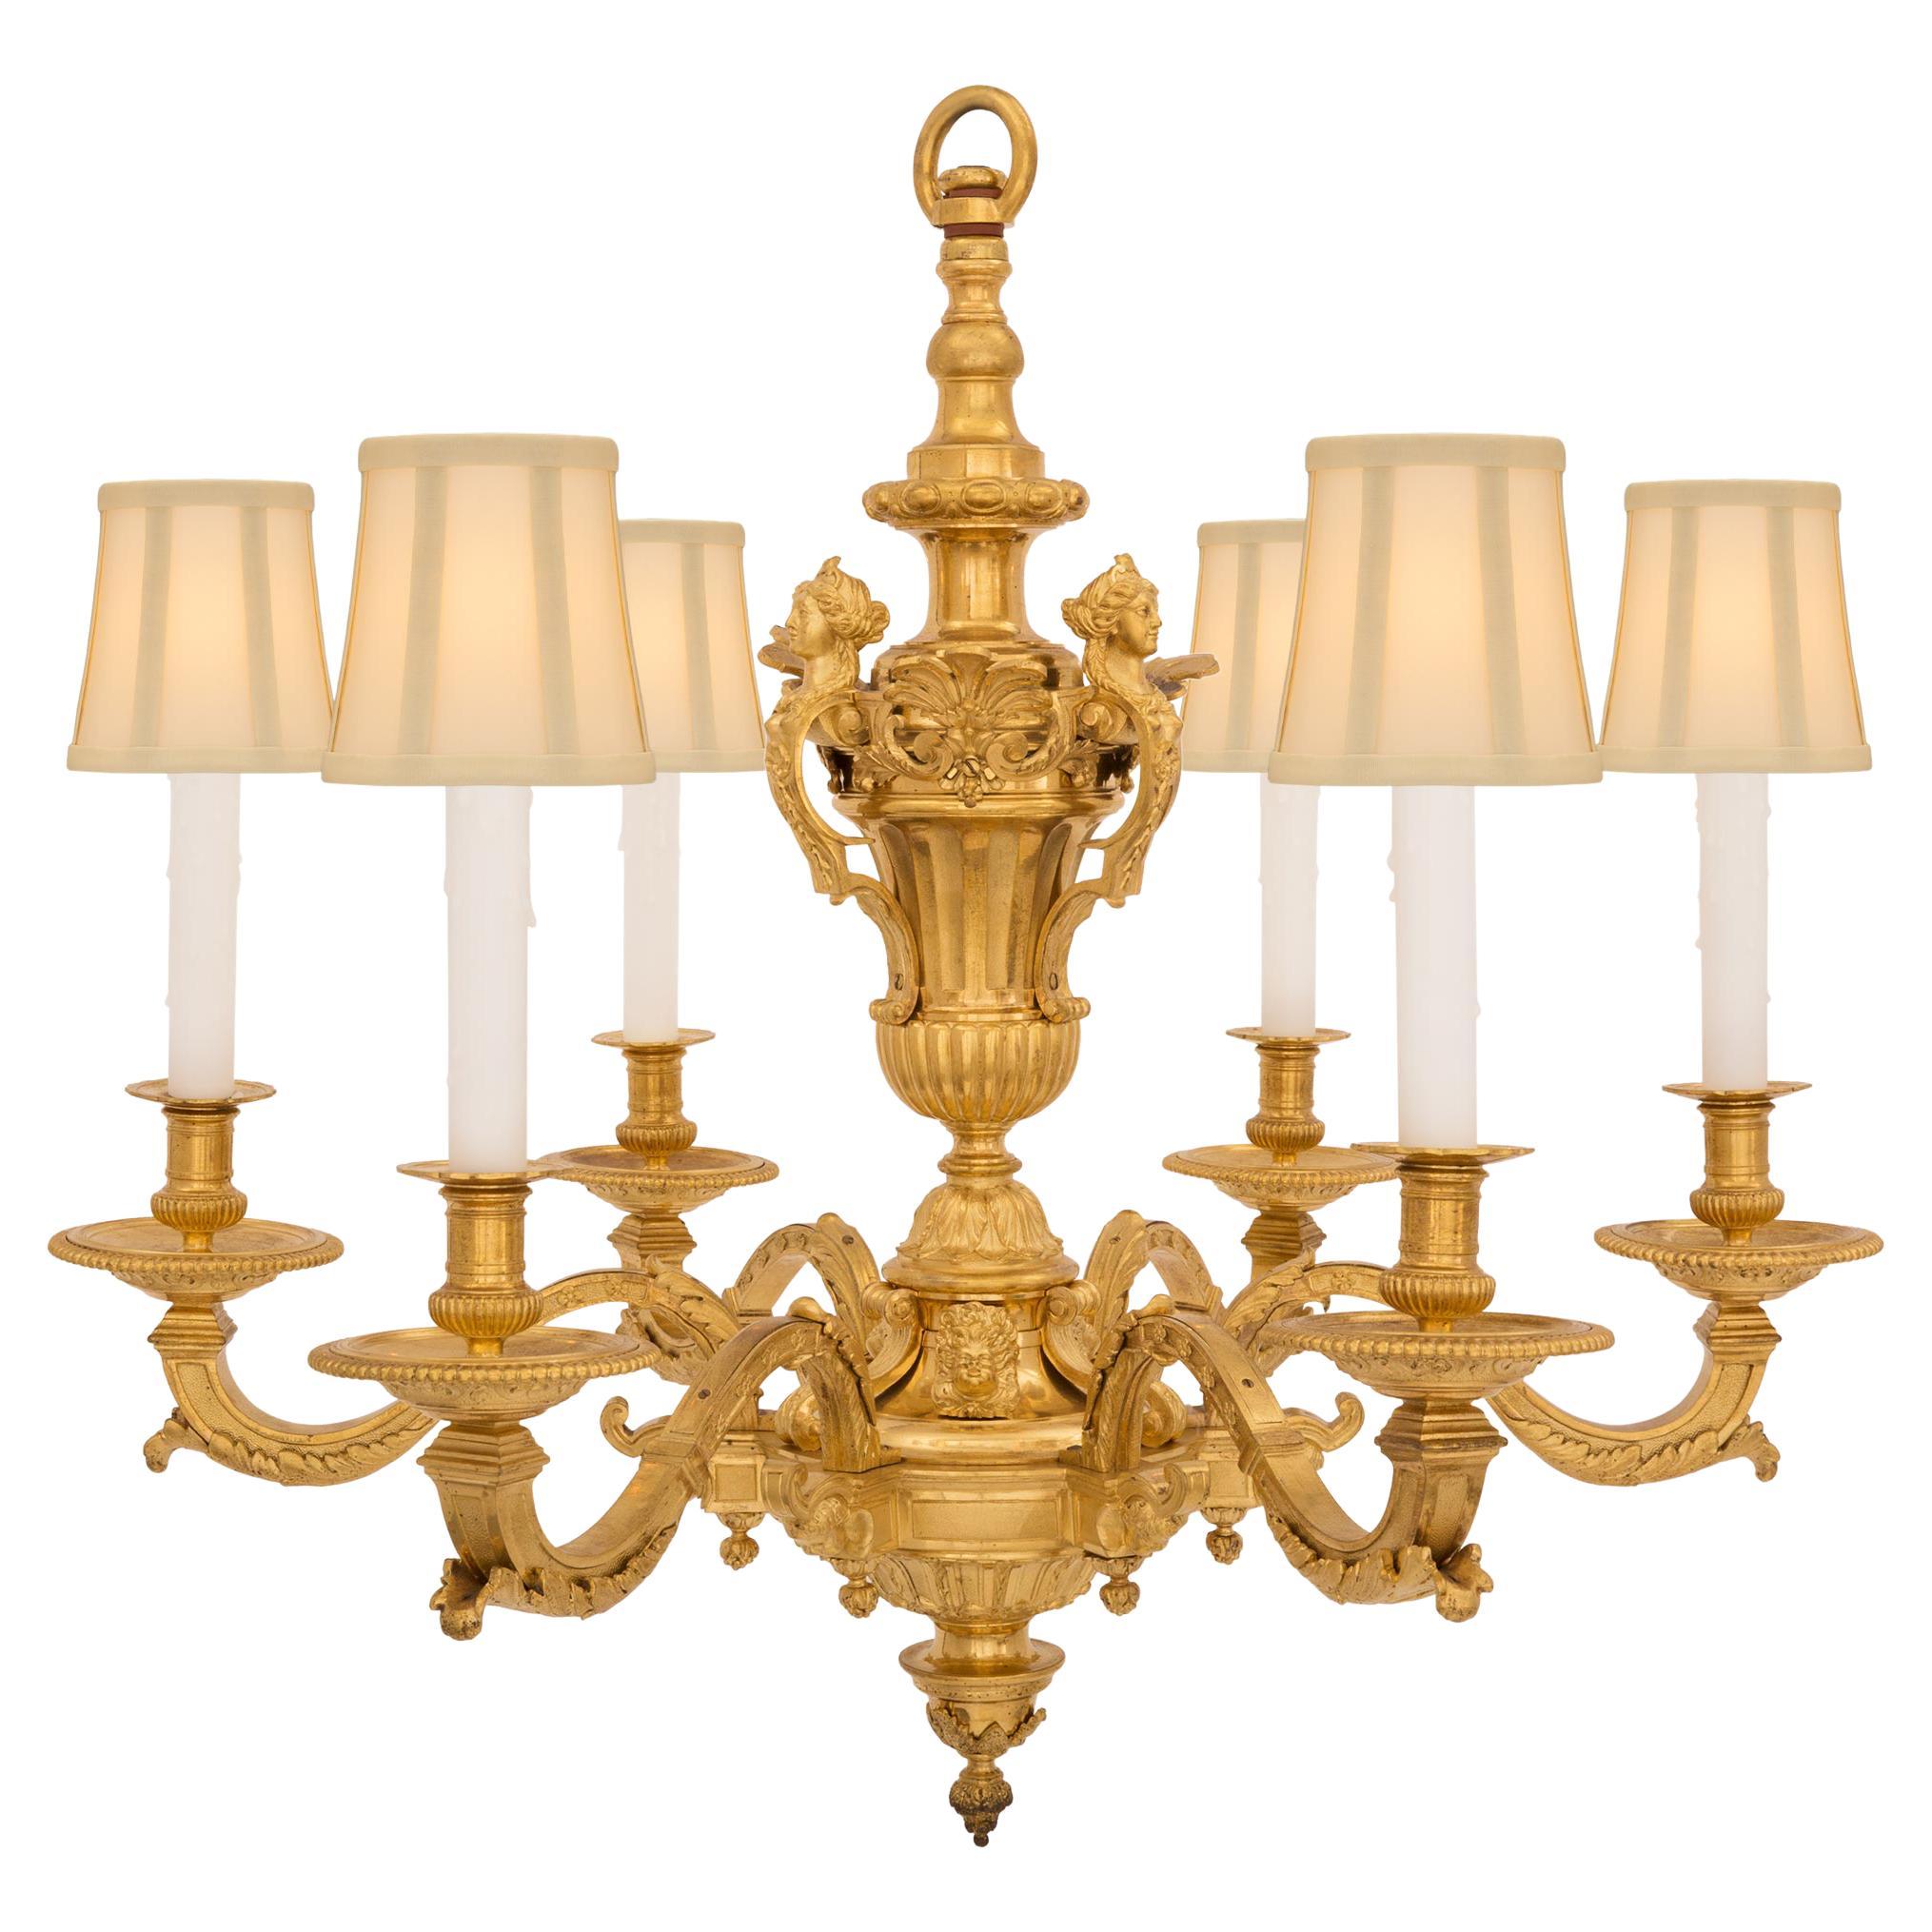 French Mid-19th Century, Louis XIV Style Eight-Arm Ormolu Chandelier